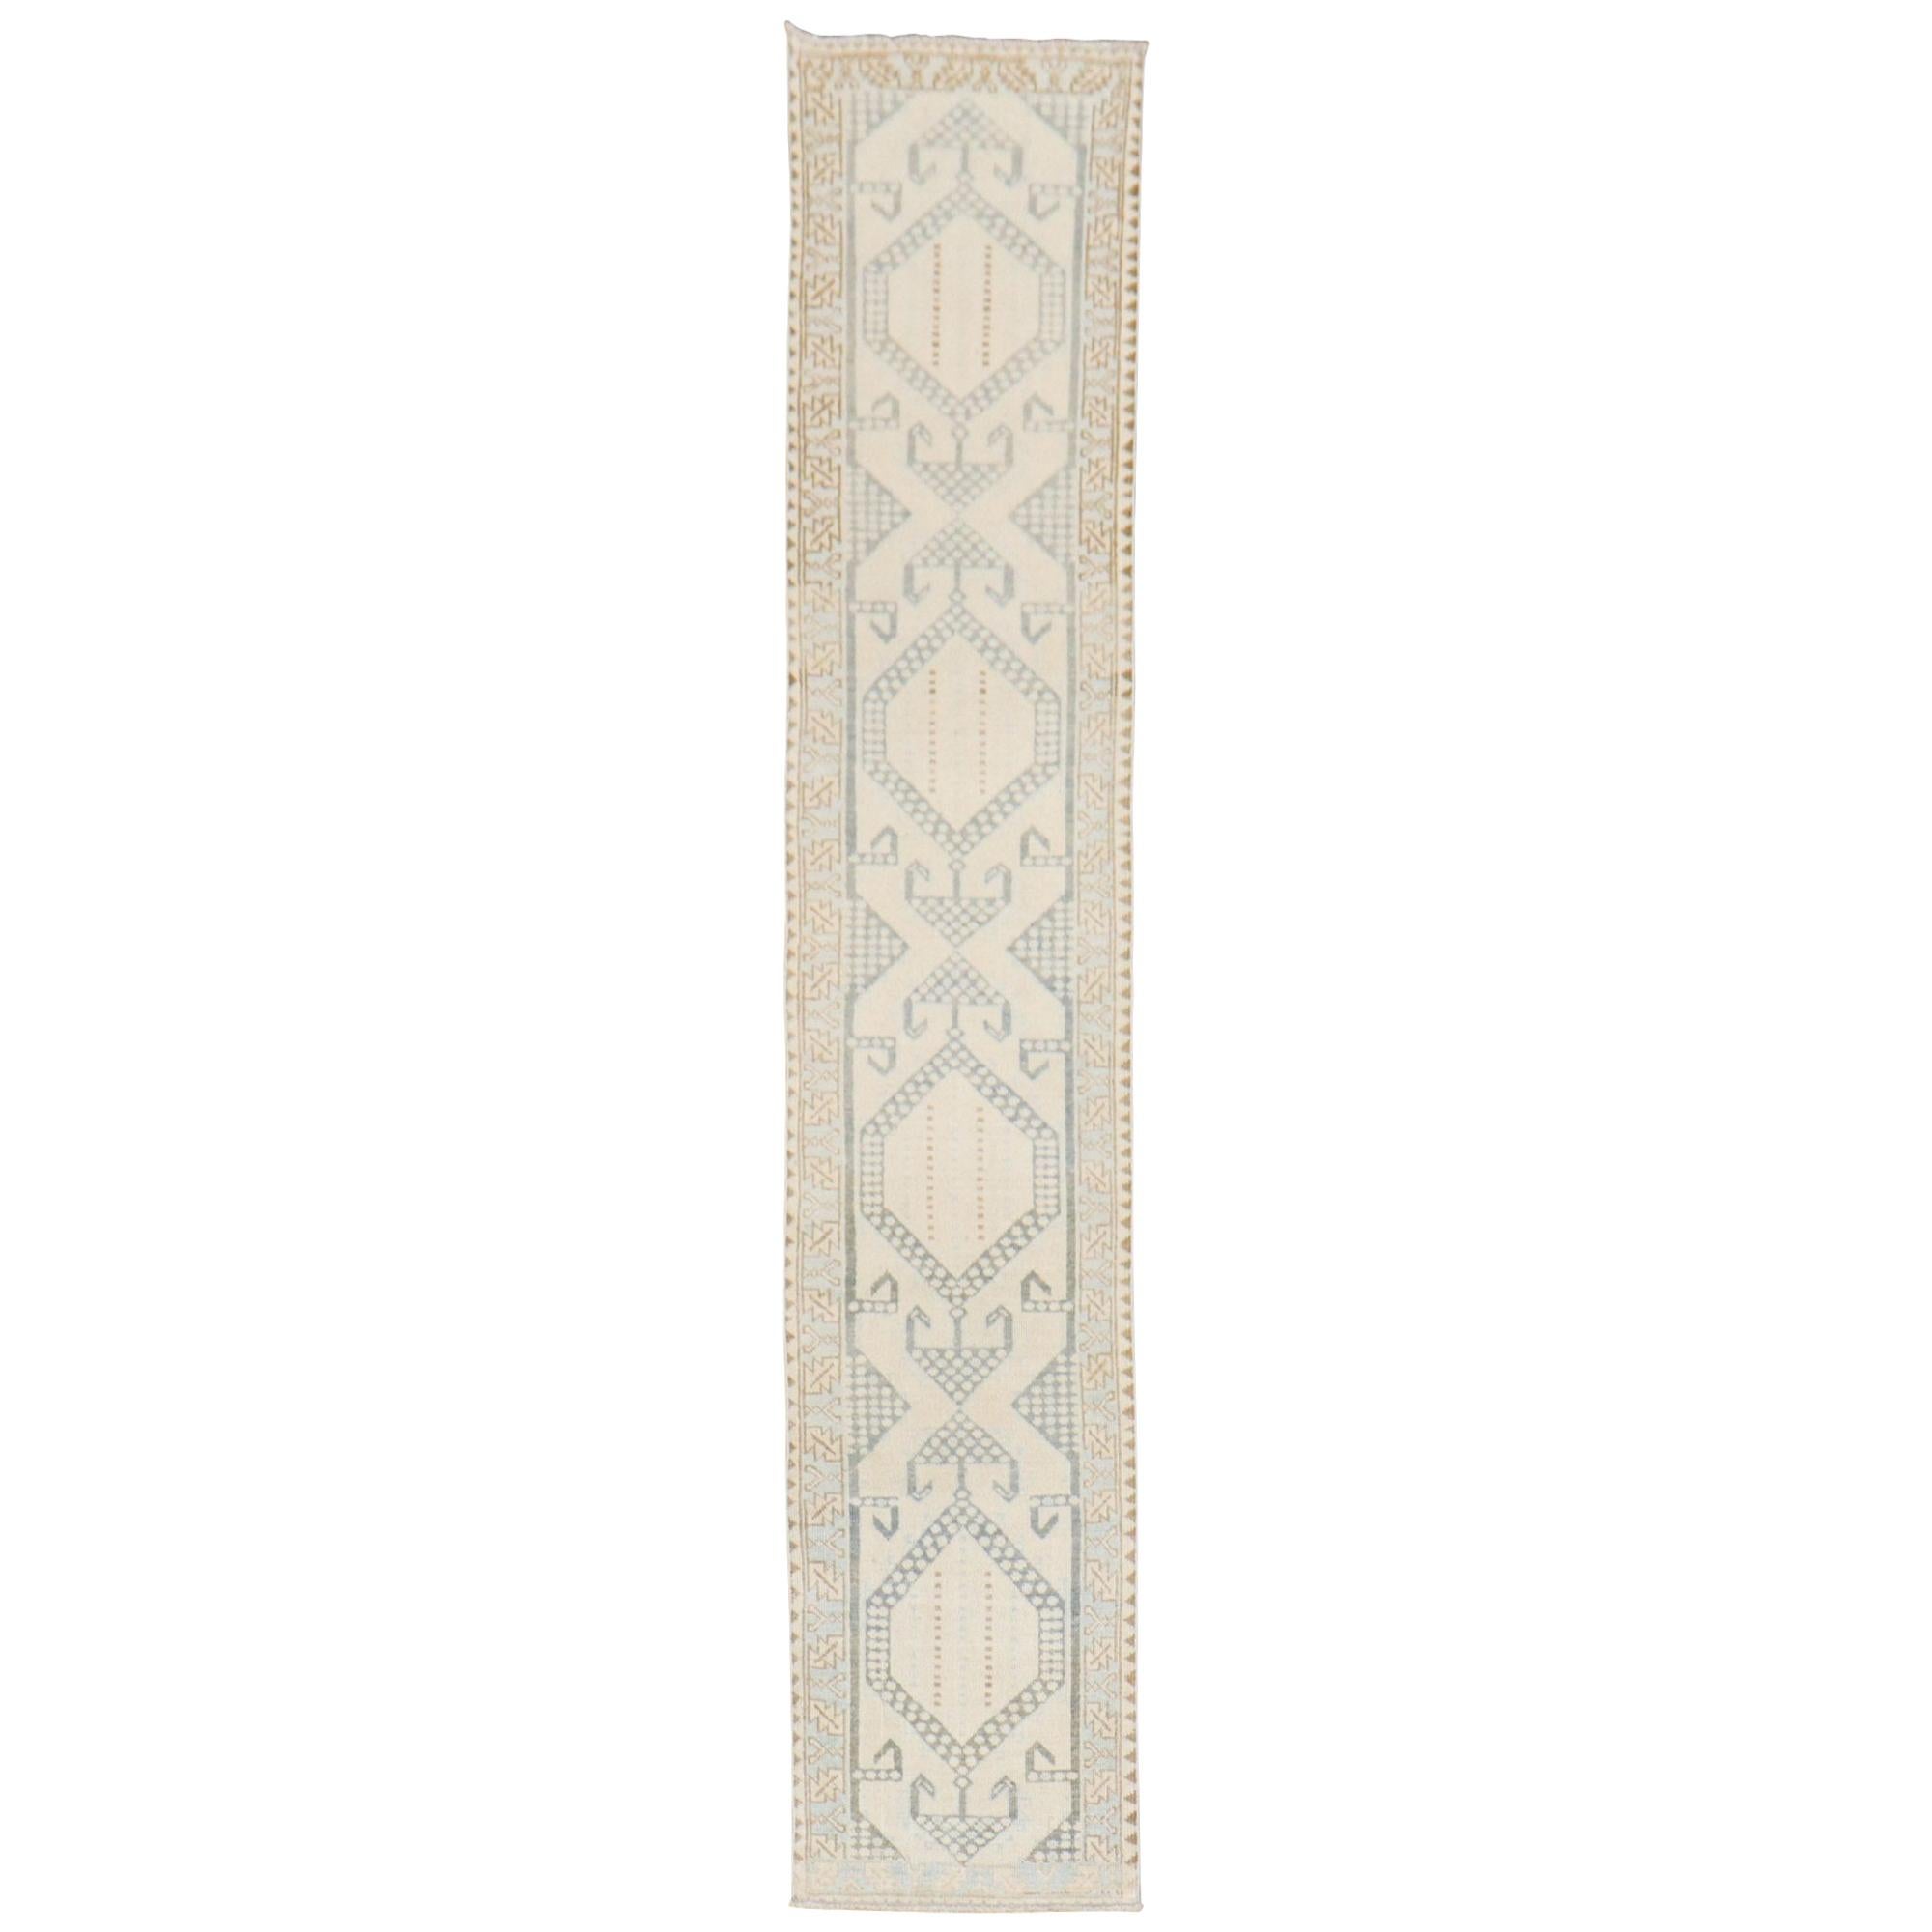 Narrow Neutral Color Persian Runner, Mid-20th Century For Sale